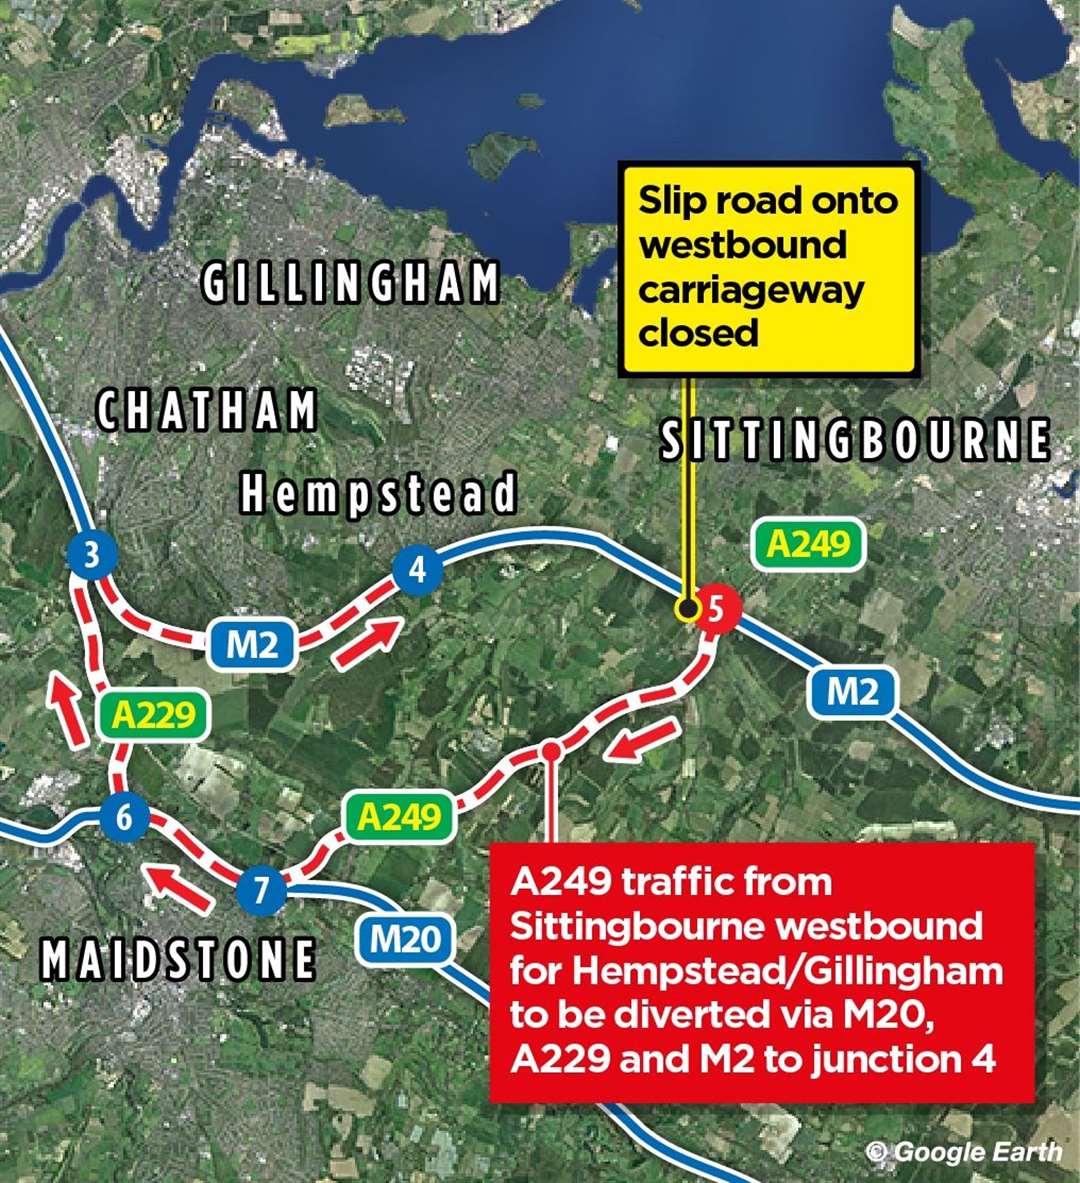 Travelling from Sittingbourne to Gillingham will take much longer as long for motorists during the closure